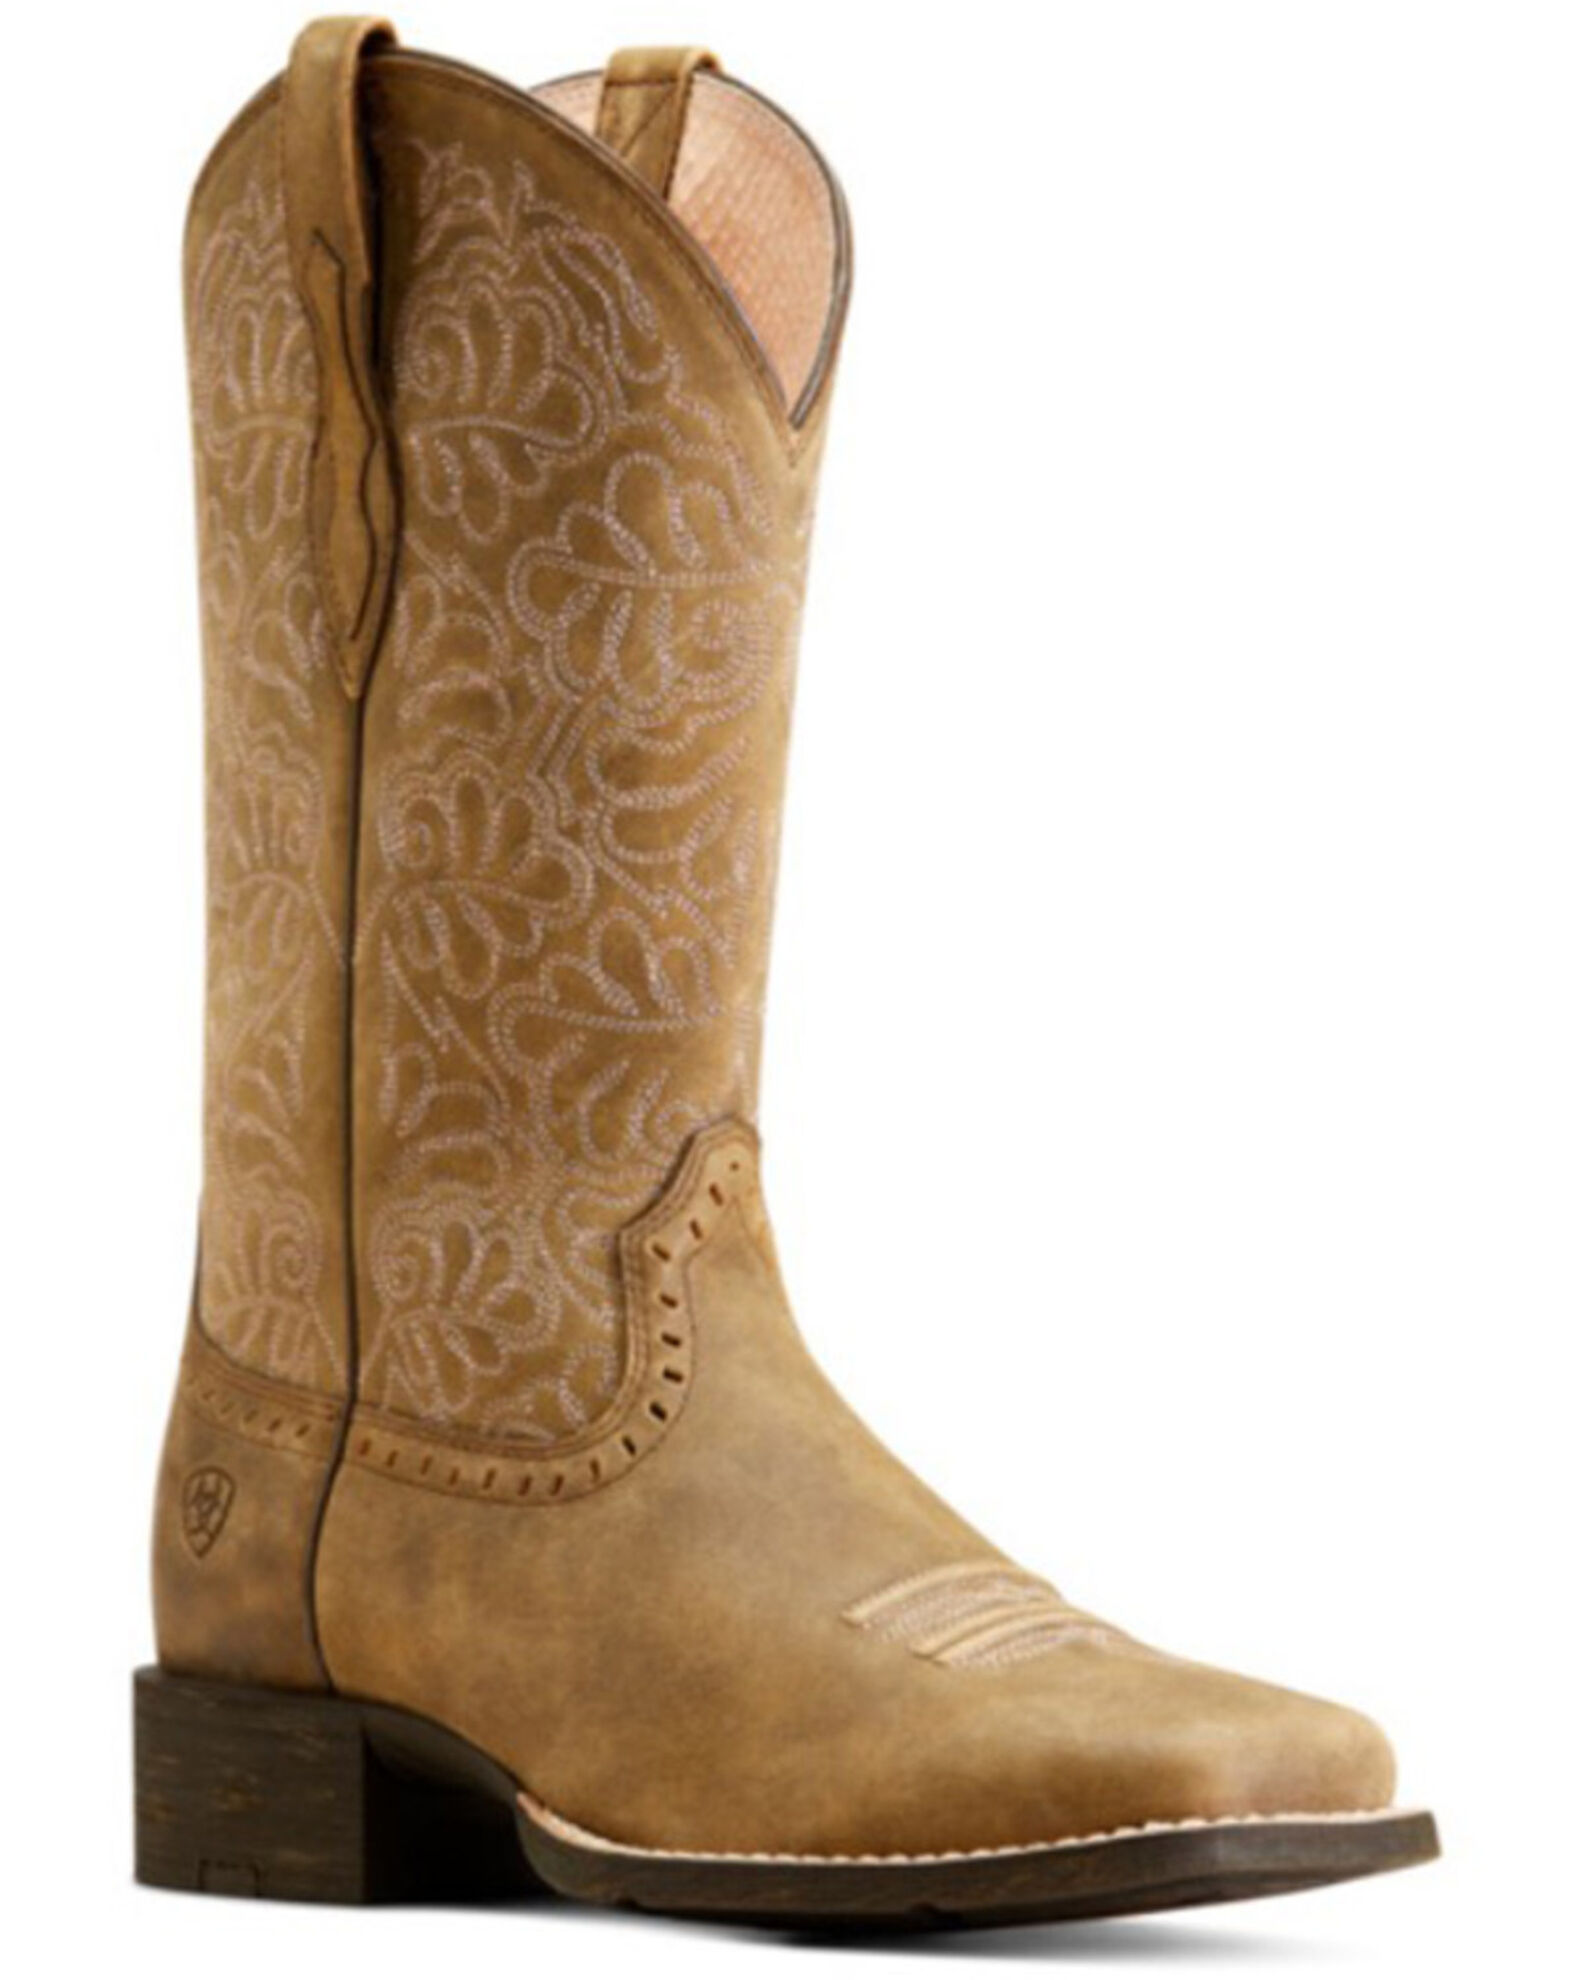 Ariat Women's Round Up Remuda Western Boots - Broad Square Toe